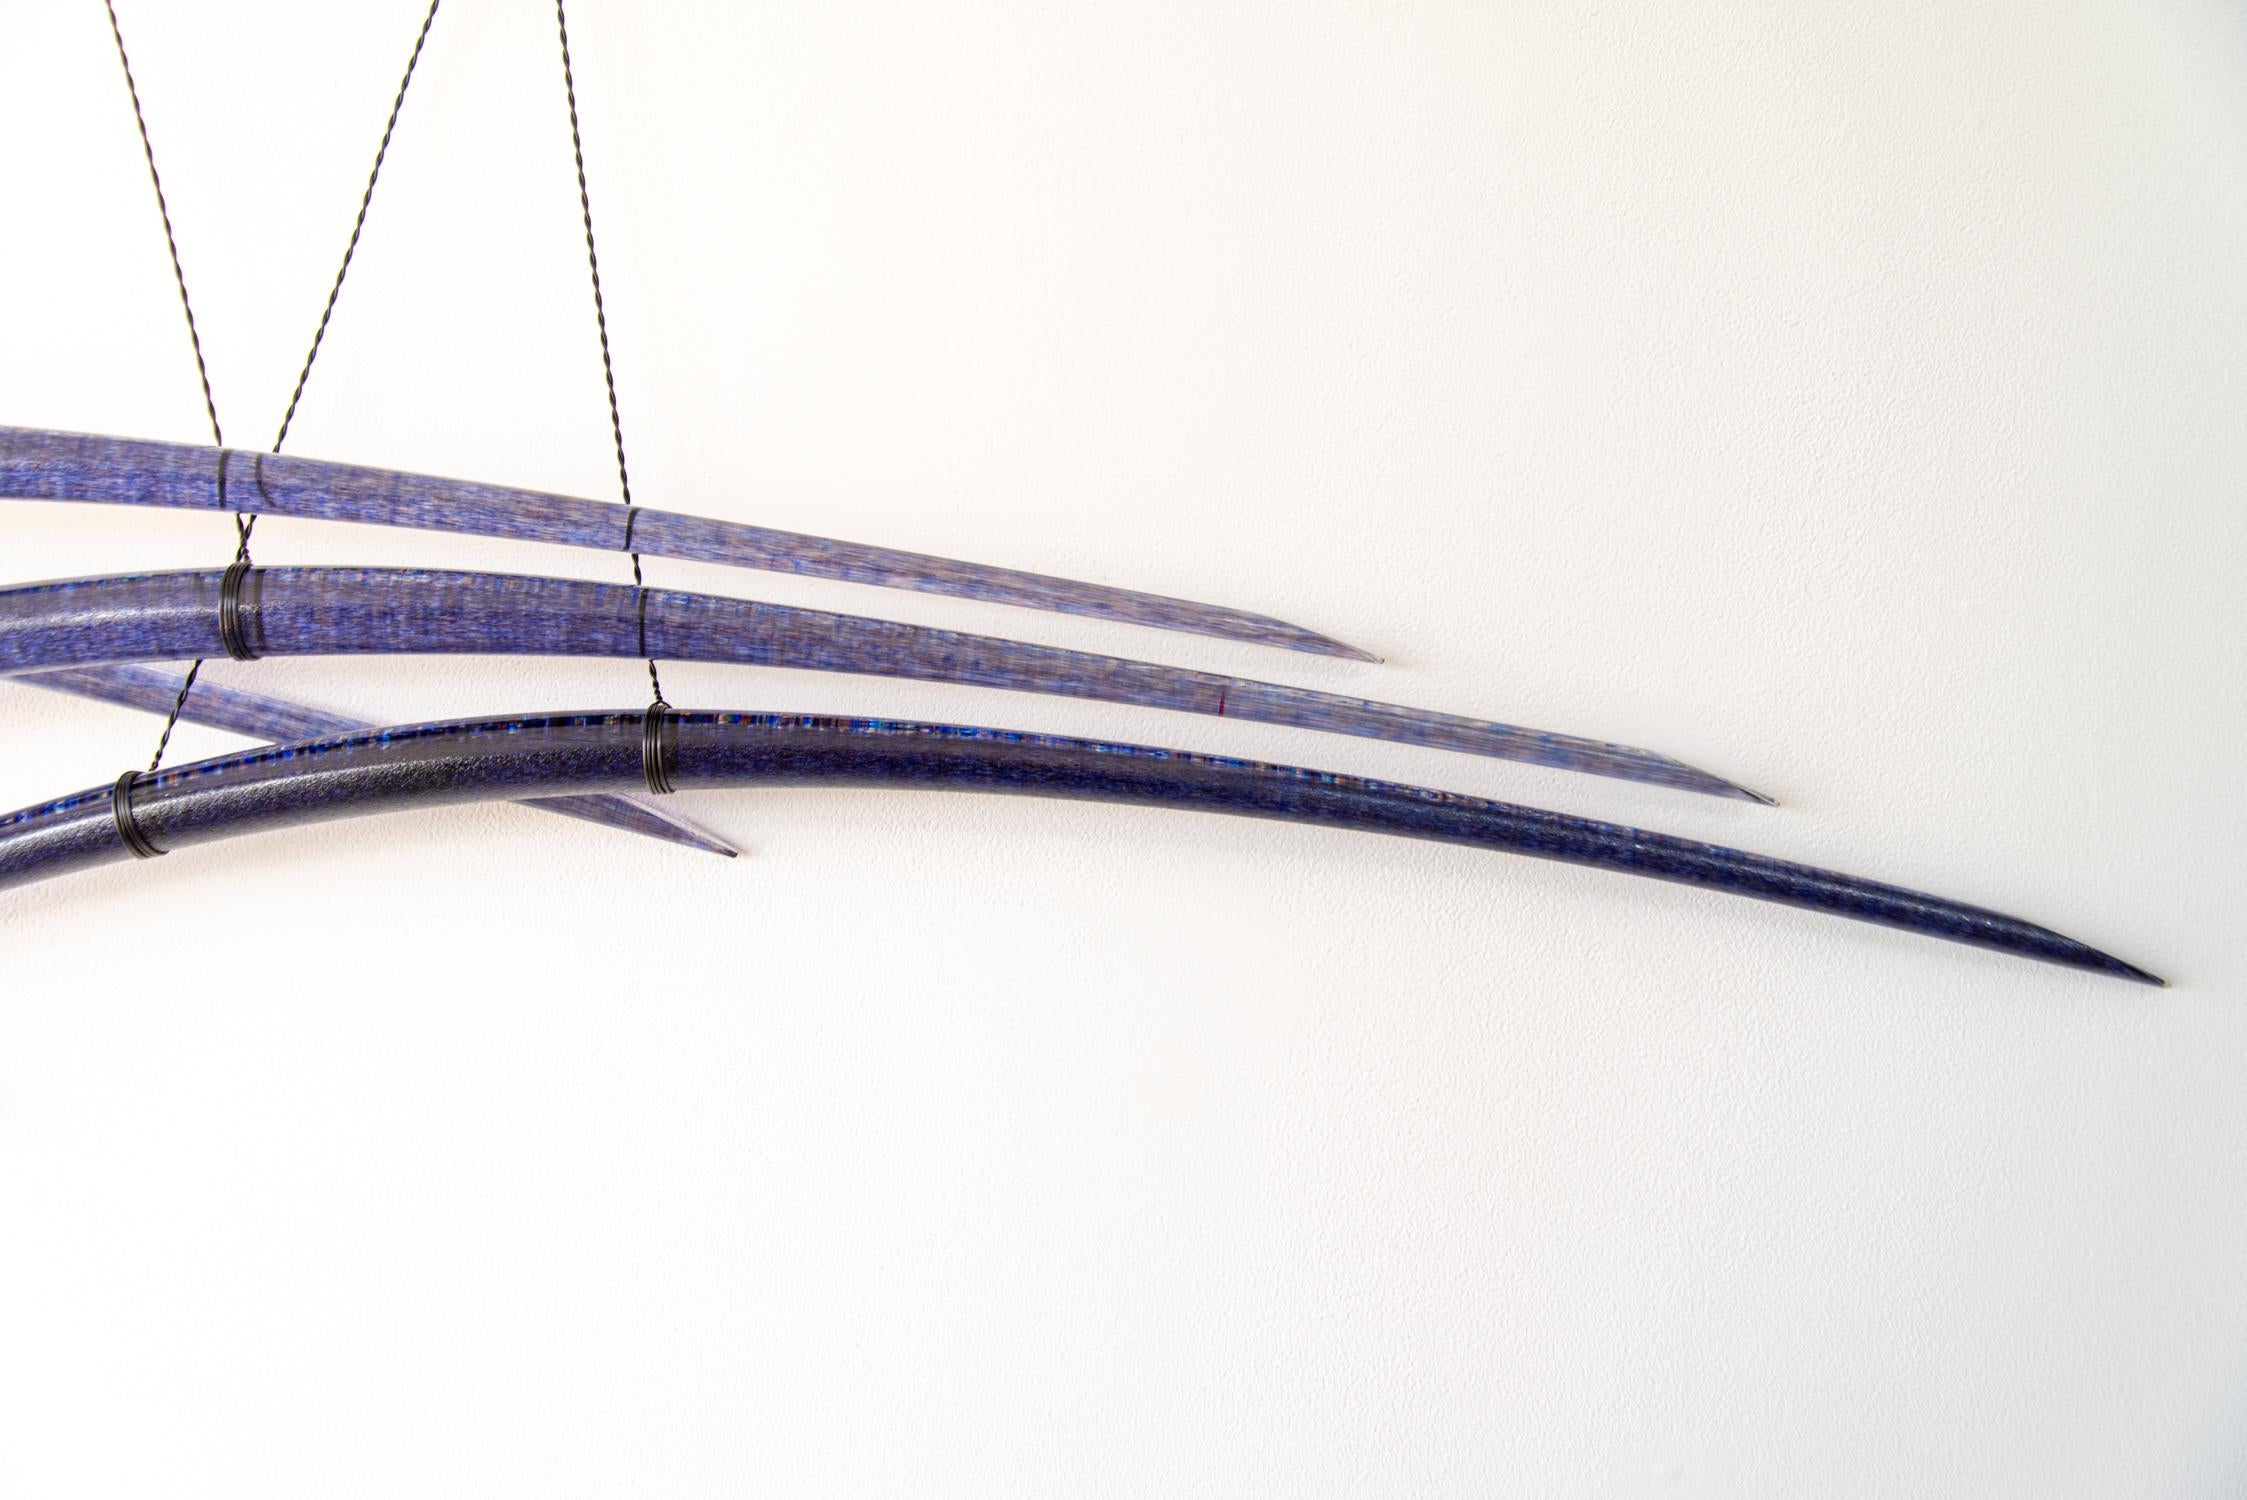 Probability Deep Blue 2 - abstract, curved, glass, suspended wall sculpture - Contemporary Mixed Media Art by John Paul Robinson